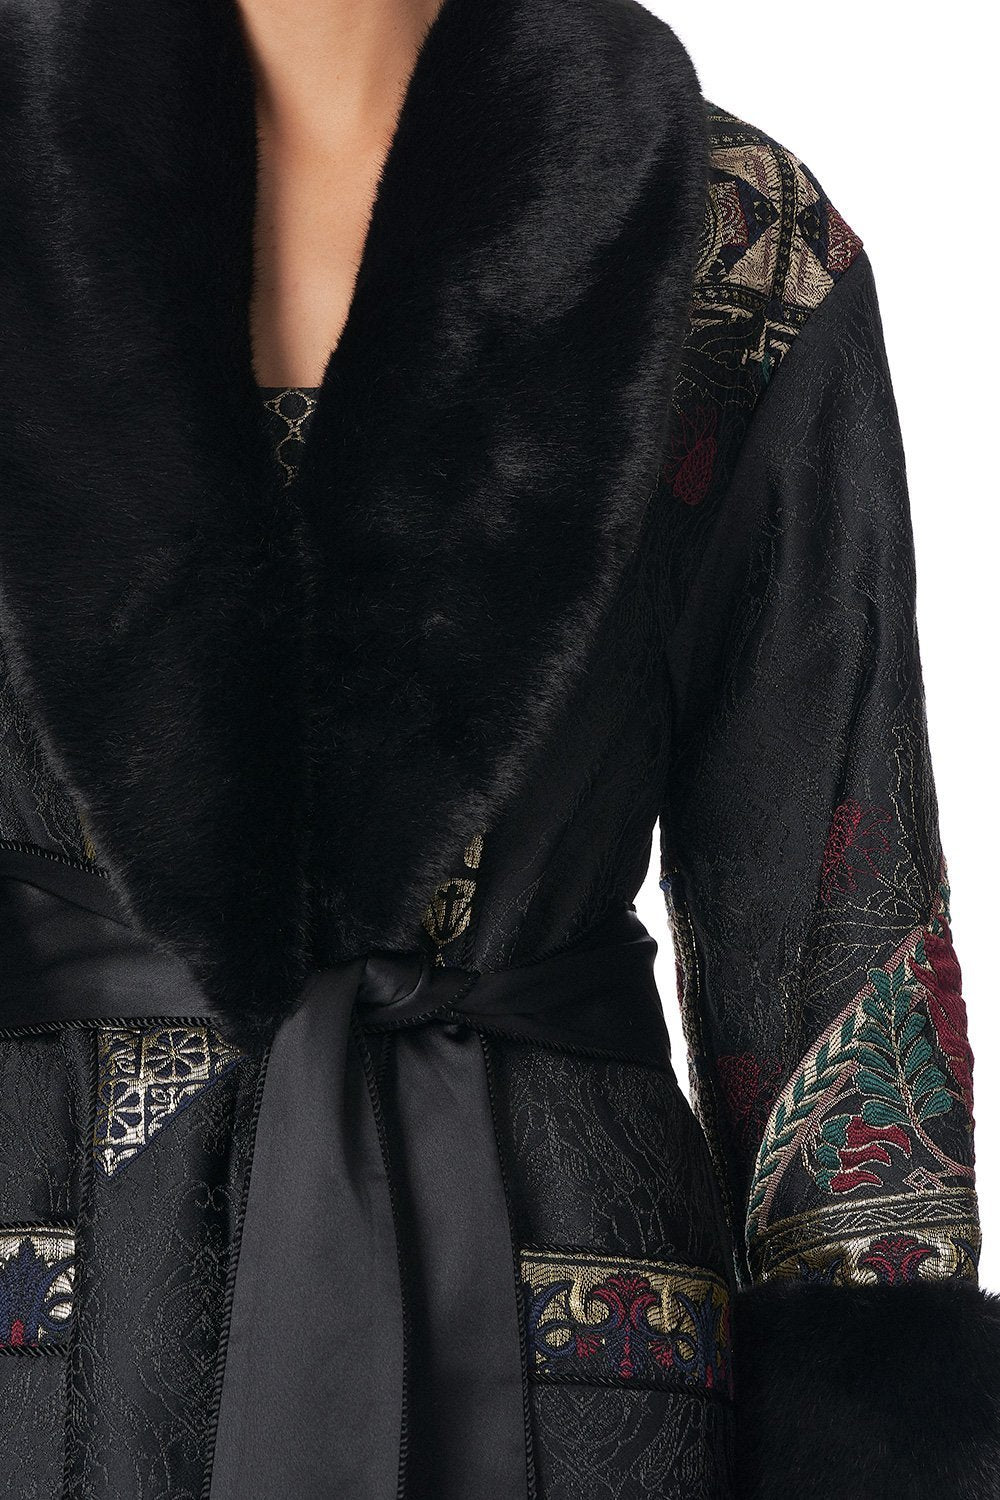 COAT WITH FEUX FUR CUFF AND COLLAR BOTANICAL CHRONICLES